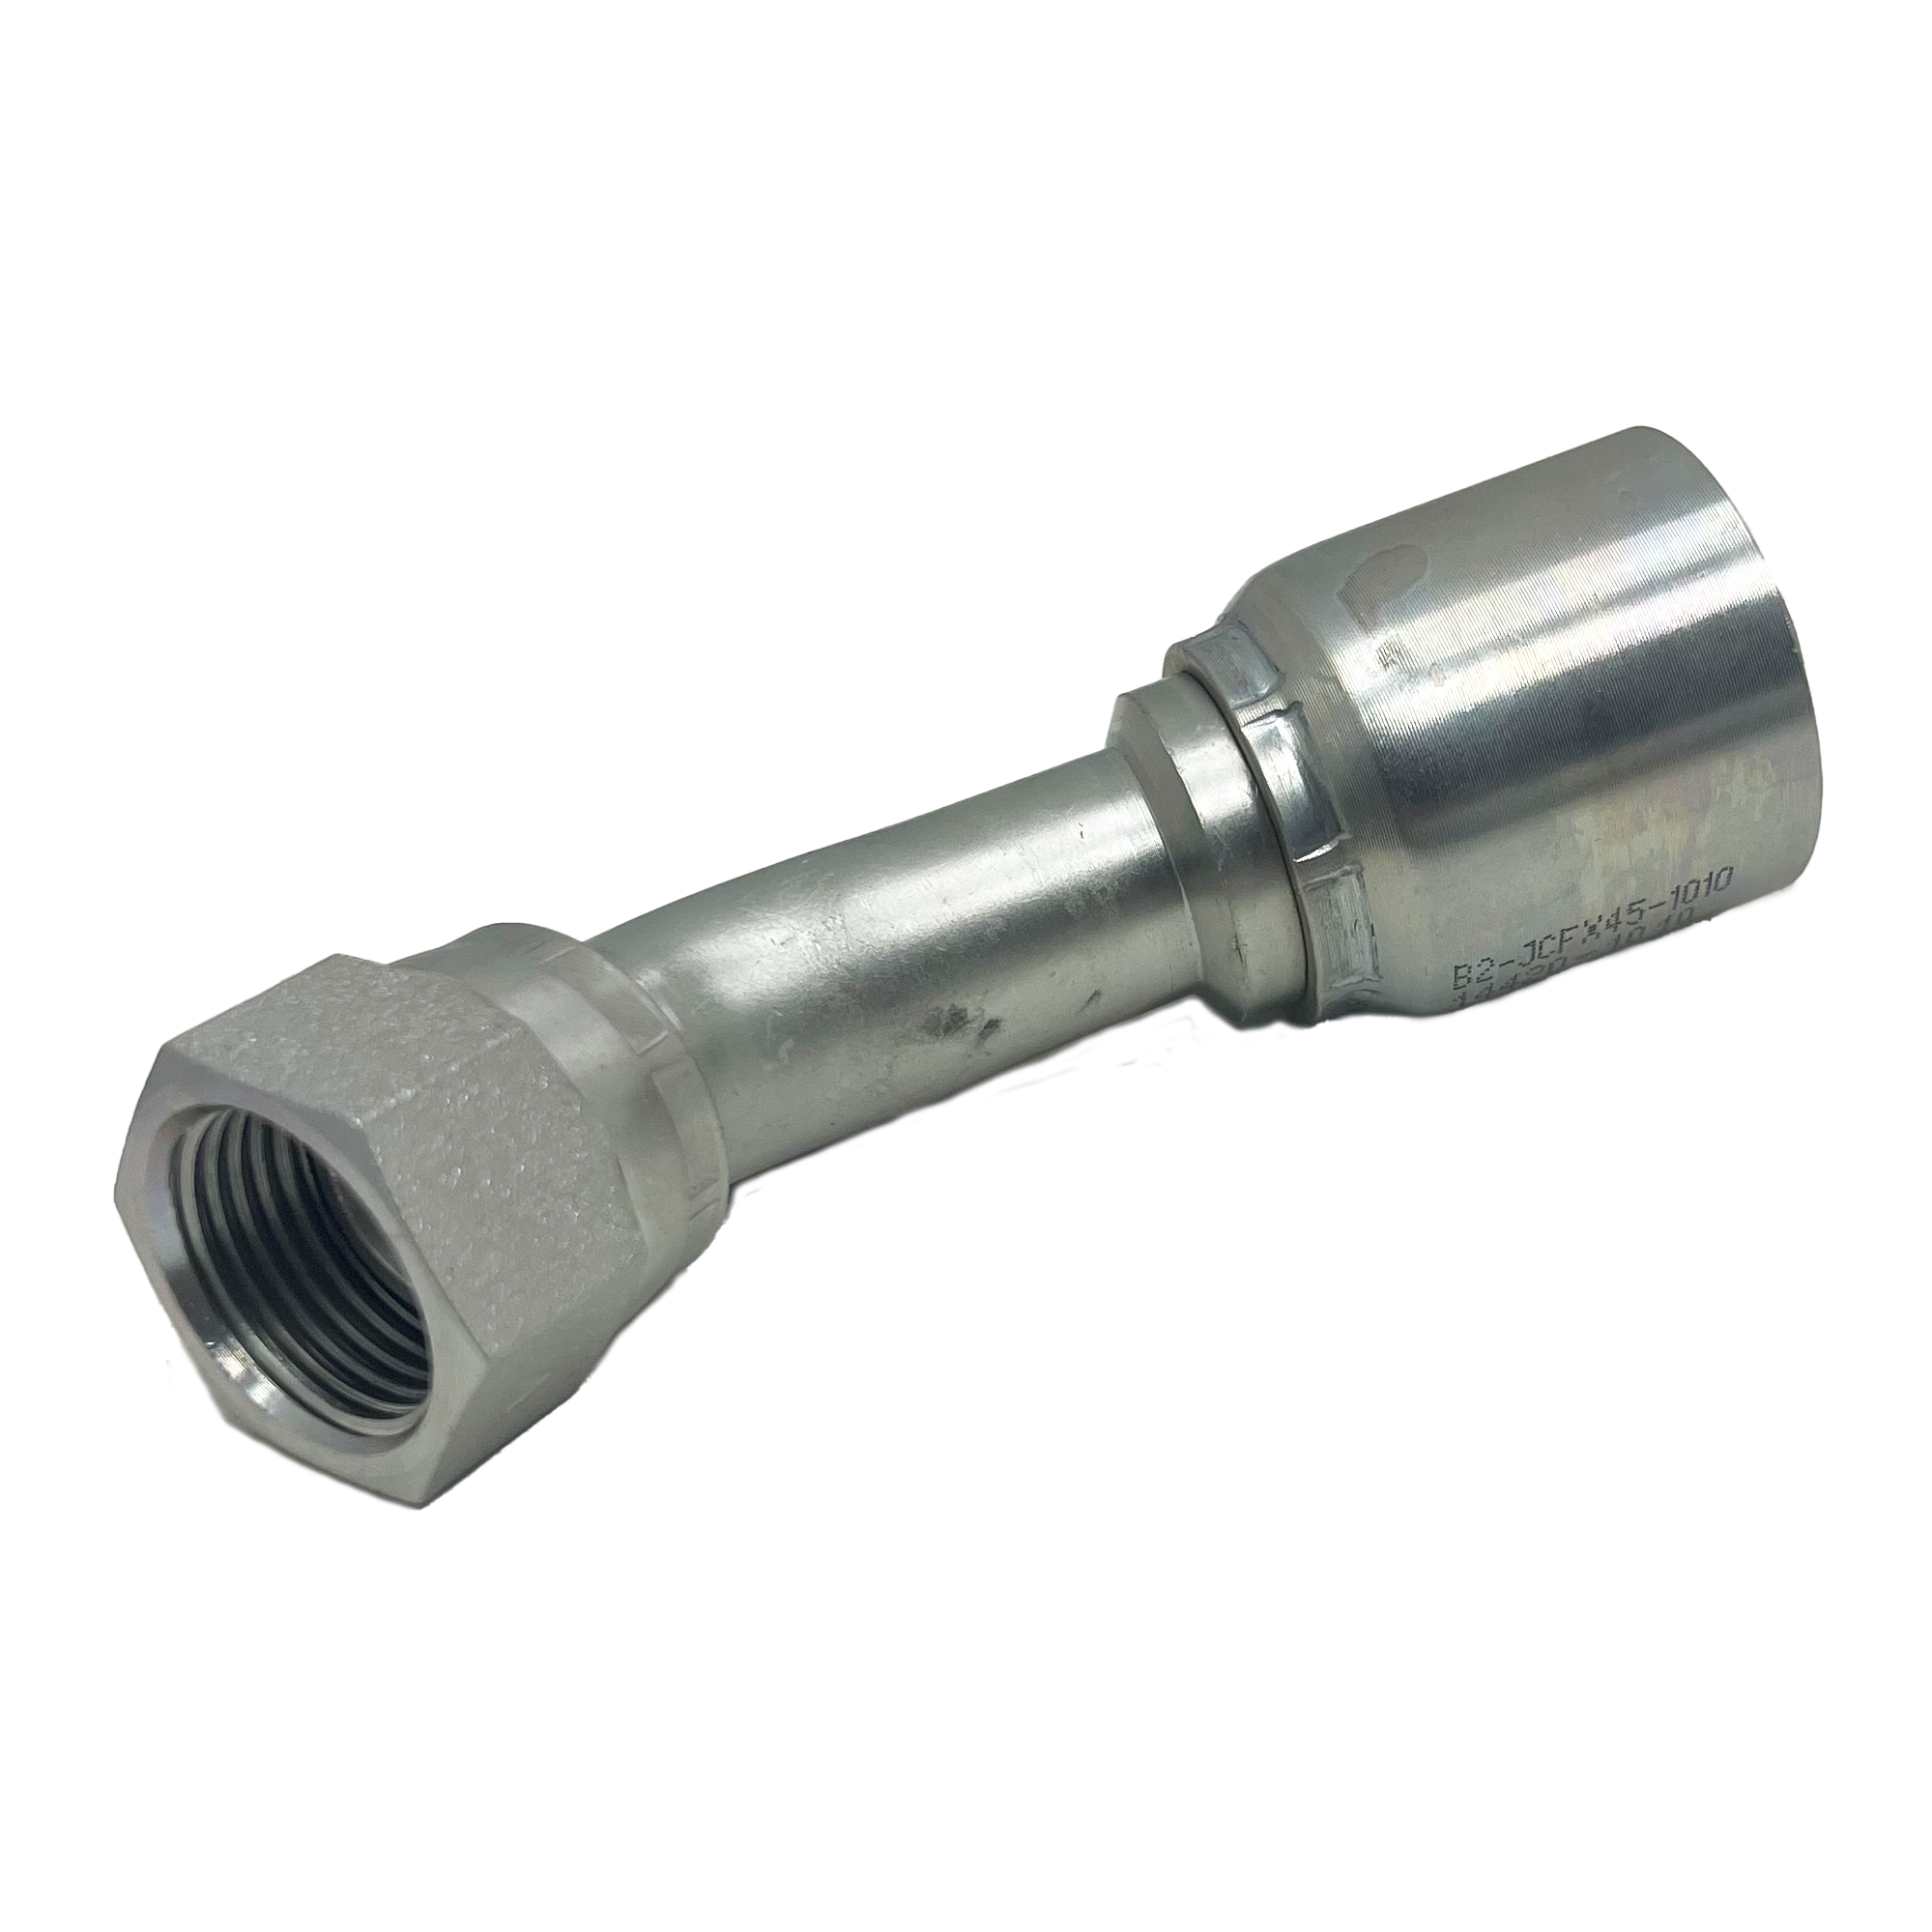 B2-JCFX45-1612: Continental Hose Fitting, 1" Hose ID x 1-1/16-12 Female JIC, 45-Degree Swivel Connection